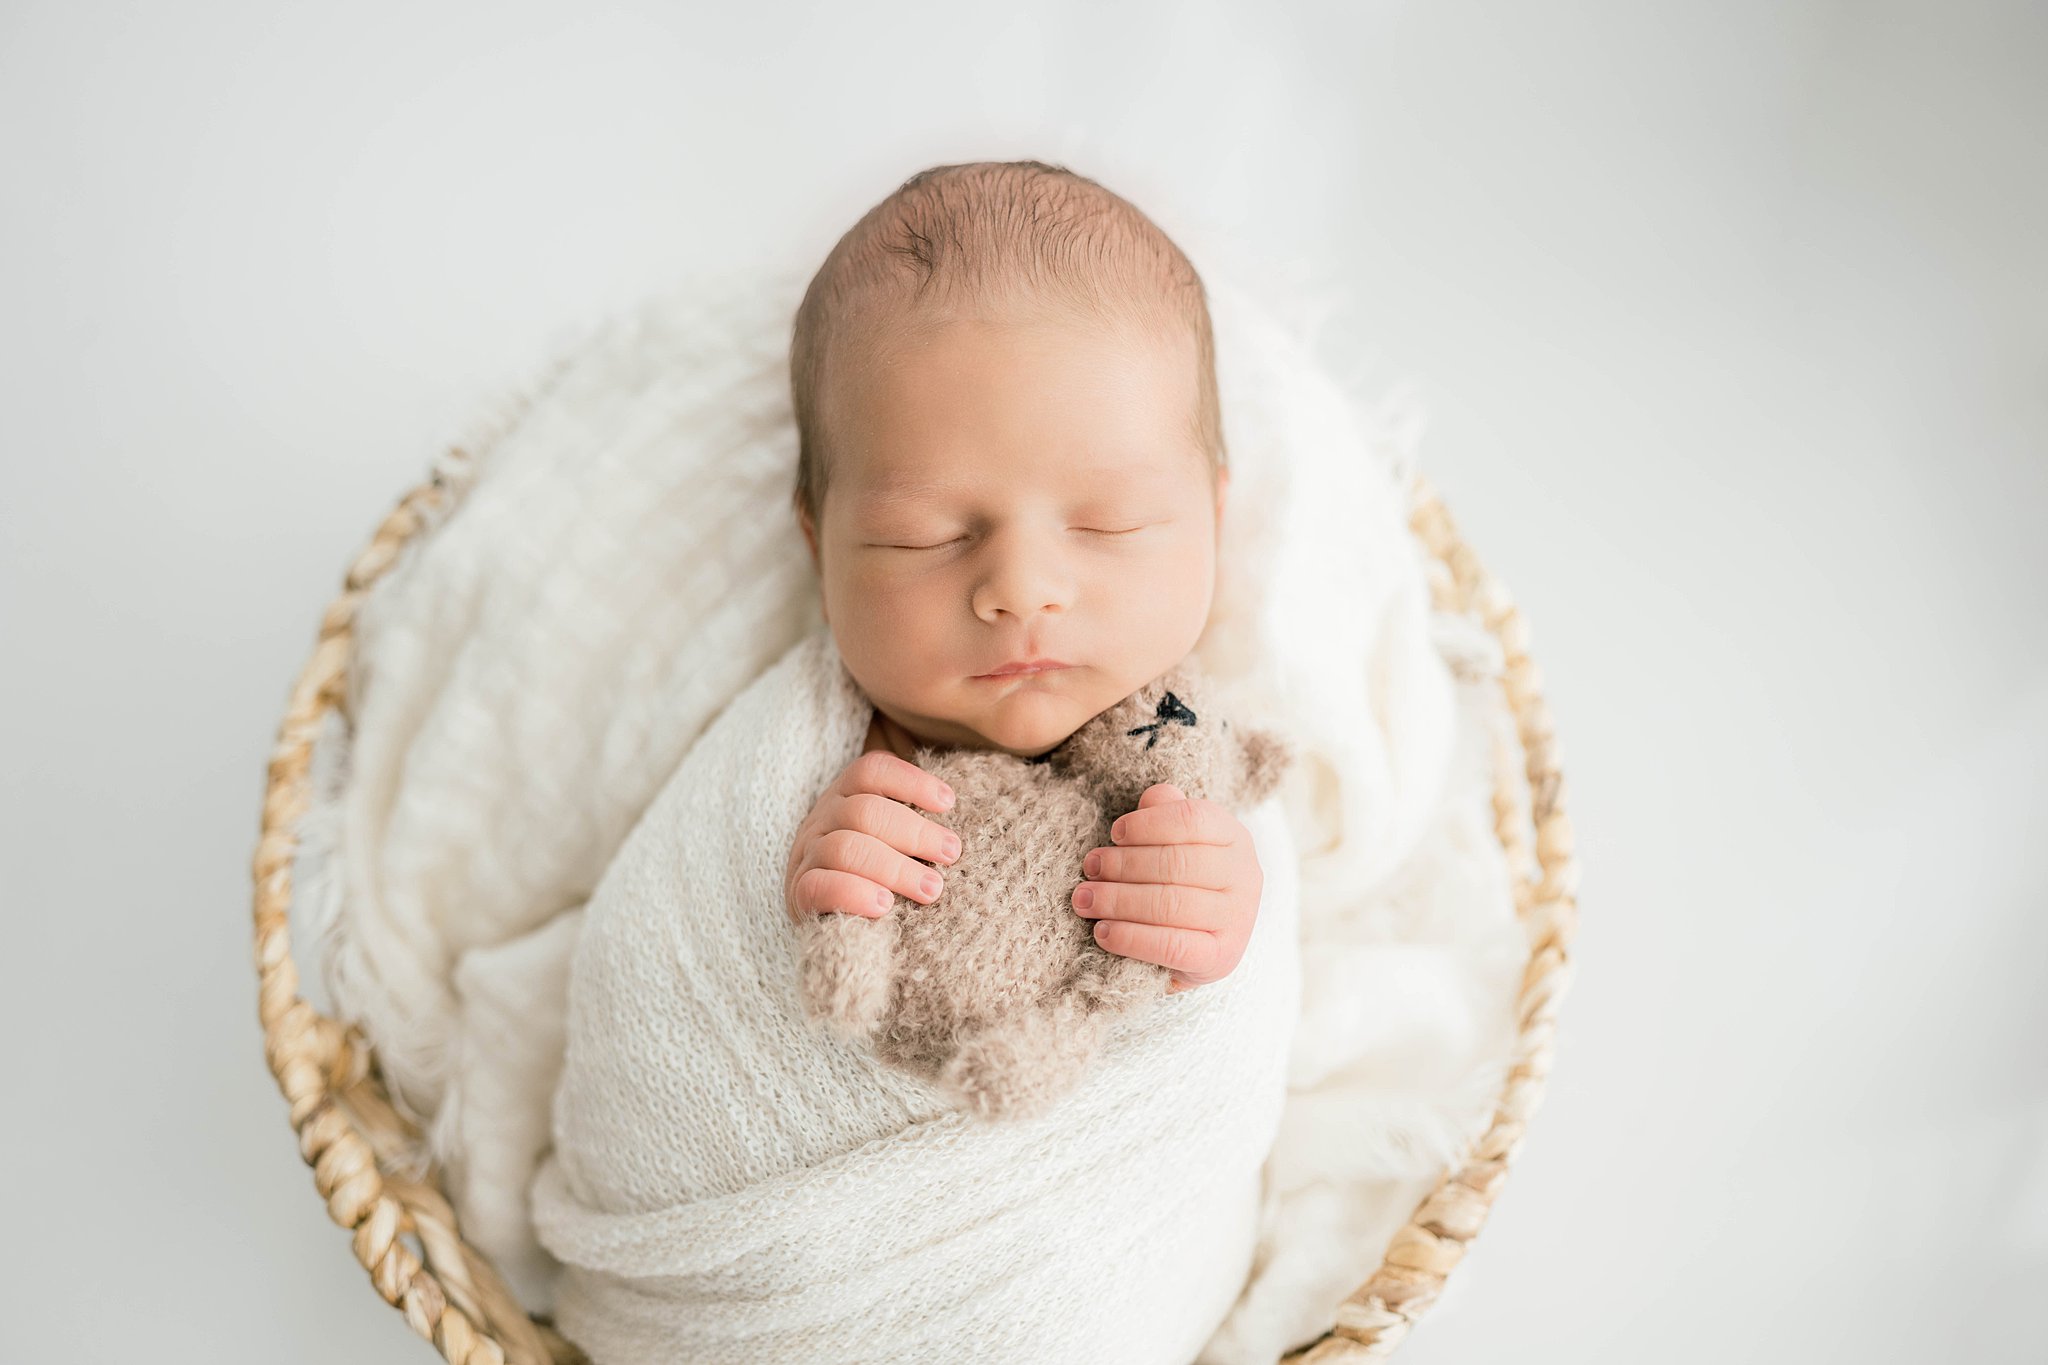 A newborn baby sleeps in a white swaddle in a woven basket cradling a small crochet stuffed animal kidzone furniture